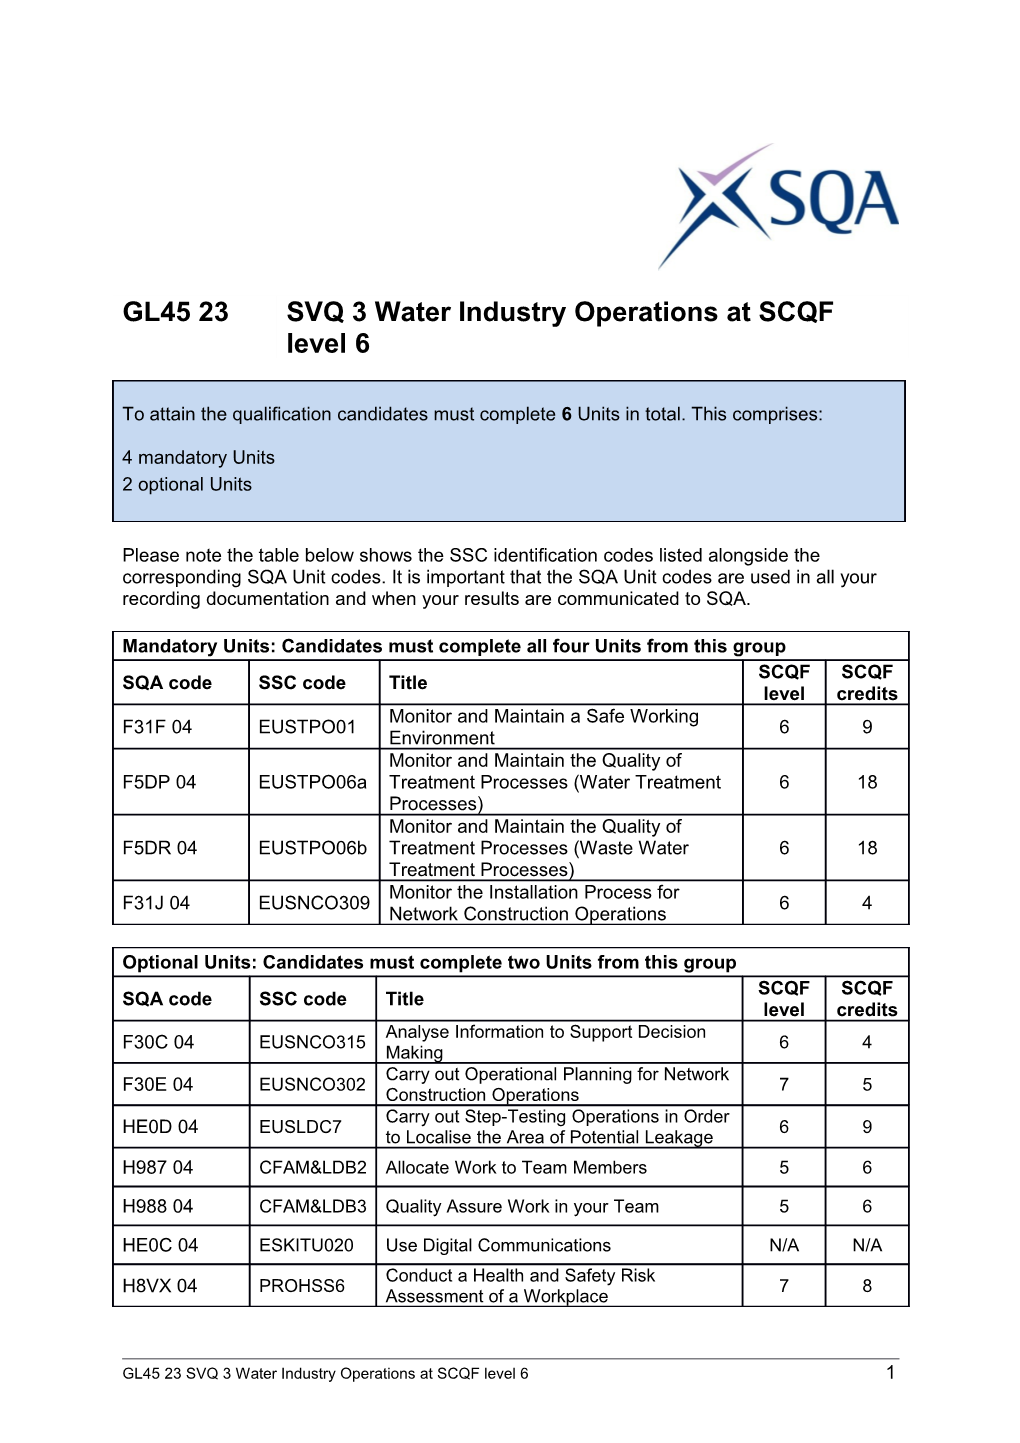 GL45 23SVQ 3 Water Industry Operations at SCQF Level 61